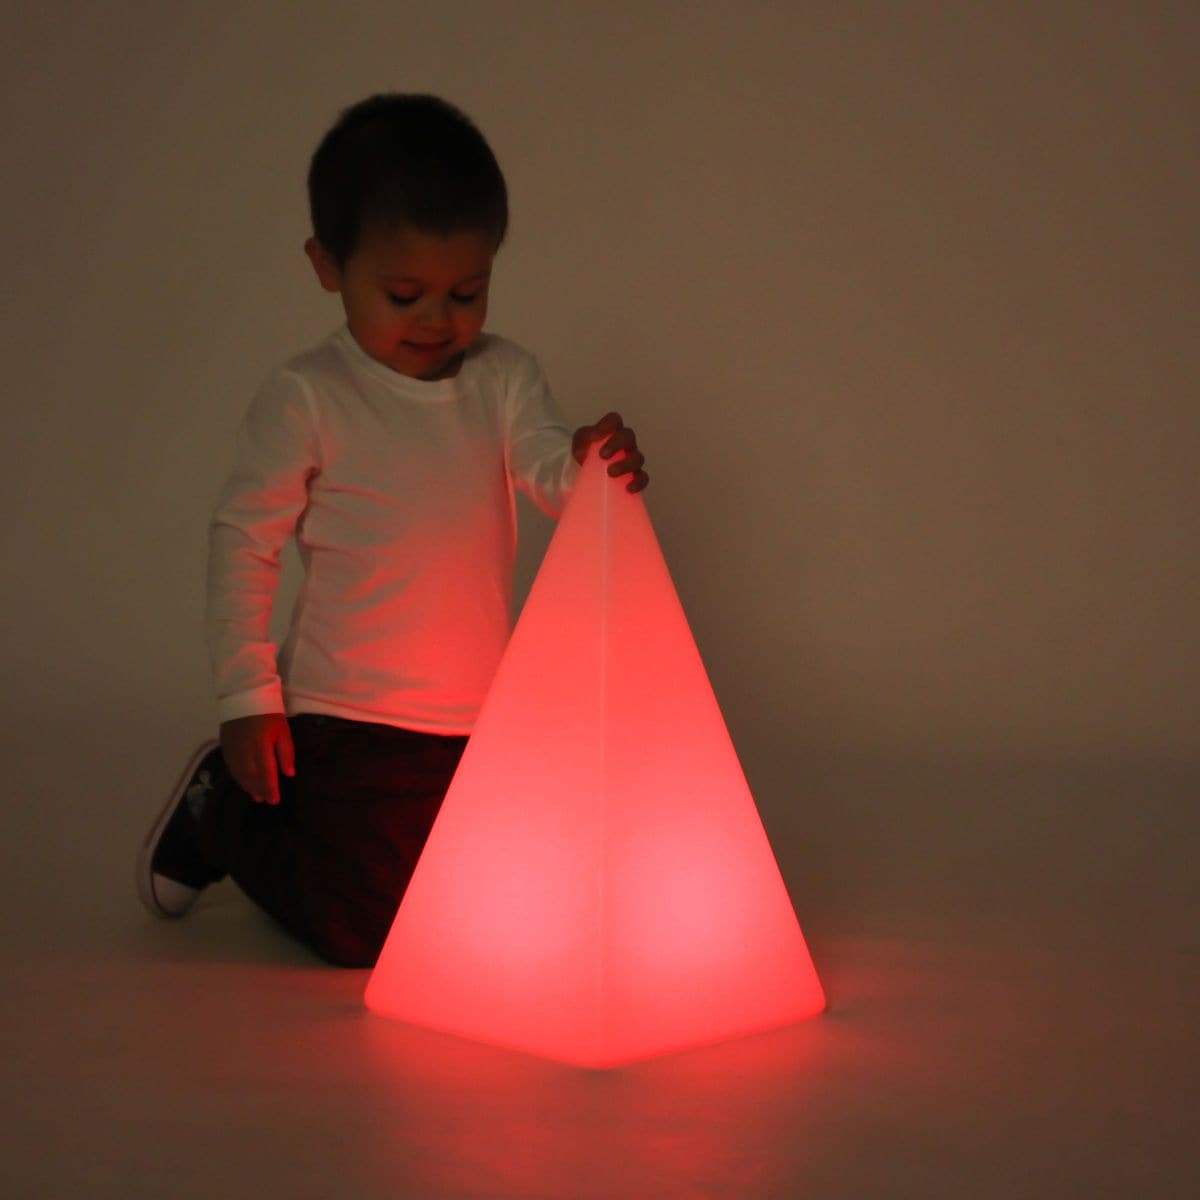 Sensory Mood Pyramid, The Sensory Mood Pyramid is a ultra-strong illuminated hollow plastic forms are aesthetically pleasing objects and can be placed around the room or used in a sensory den to provide background lighting. The Sensory Mood Pyramid provides a mood inducing light to any sensory room. Using the remote control you can choose one of 16 different colours or set to fade smoothly through the entire spectrum of shades from a cool ultra-violet to a warm red. Their appearance is mesmeric and the colo